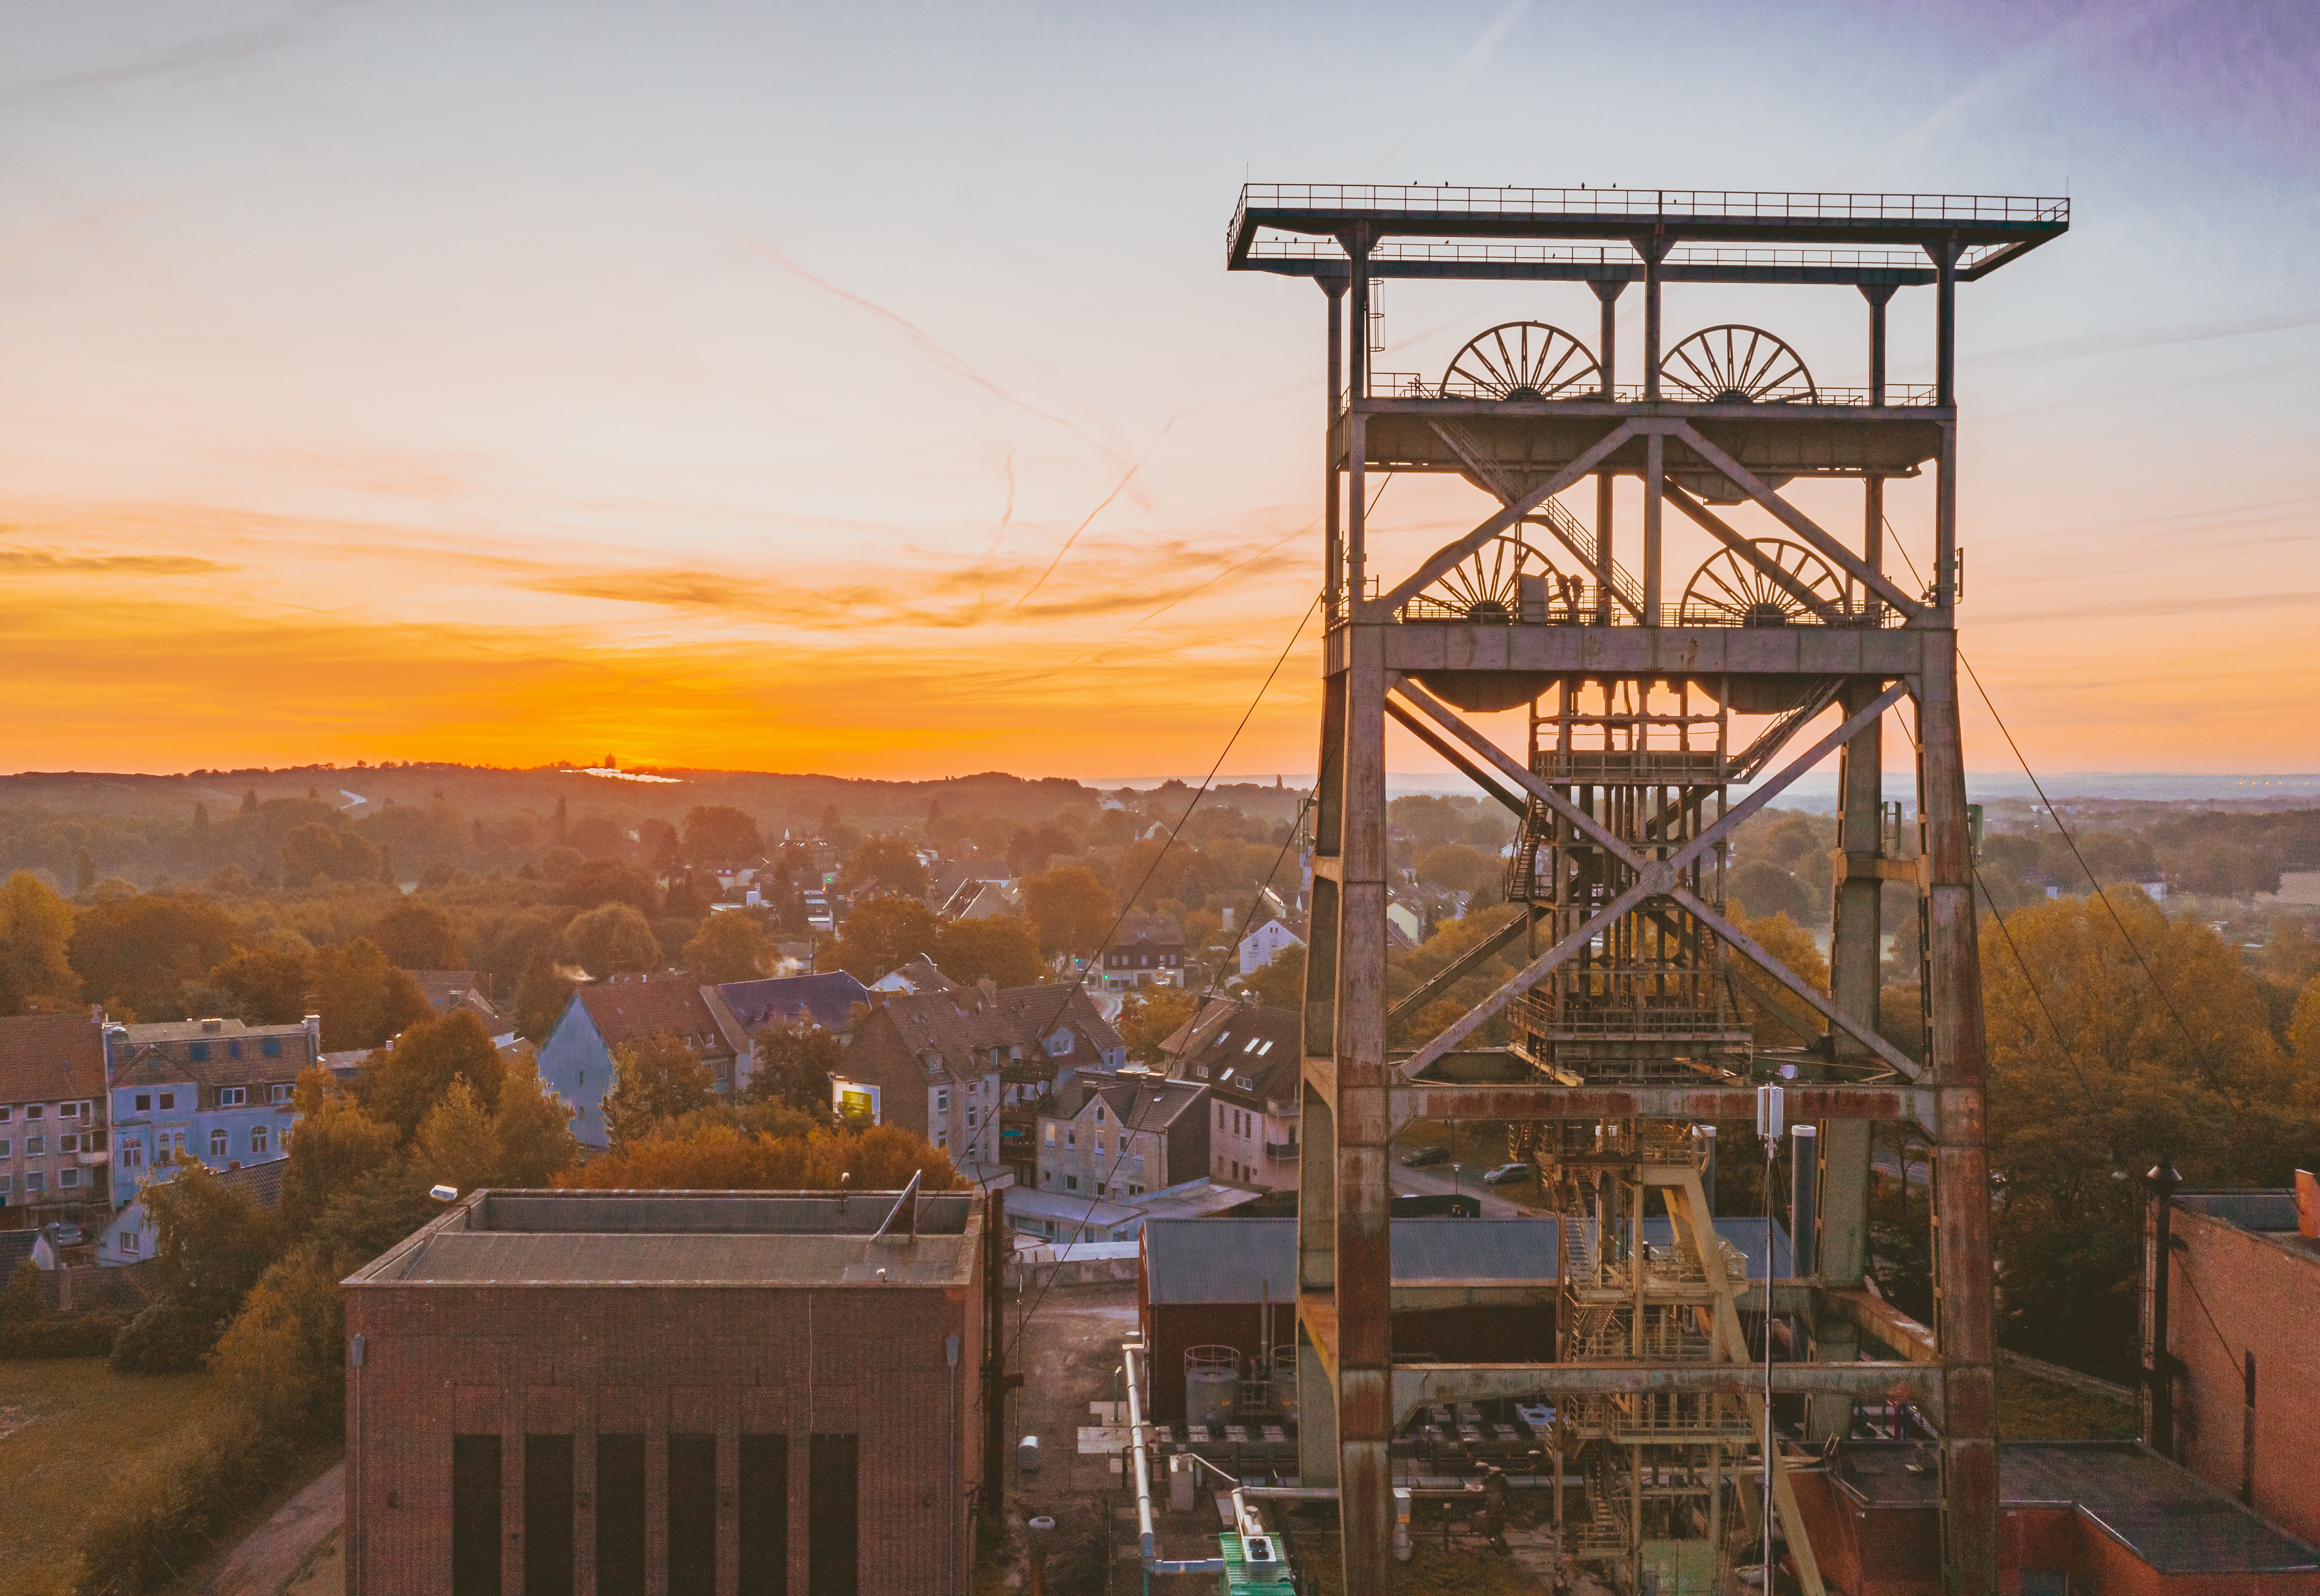 View over the City of Bochum at sunset